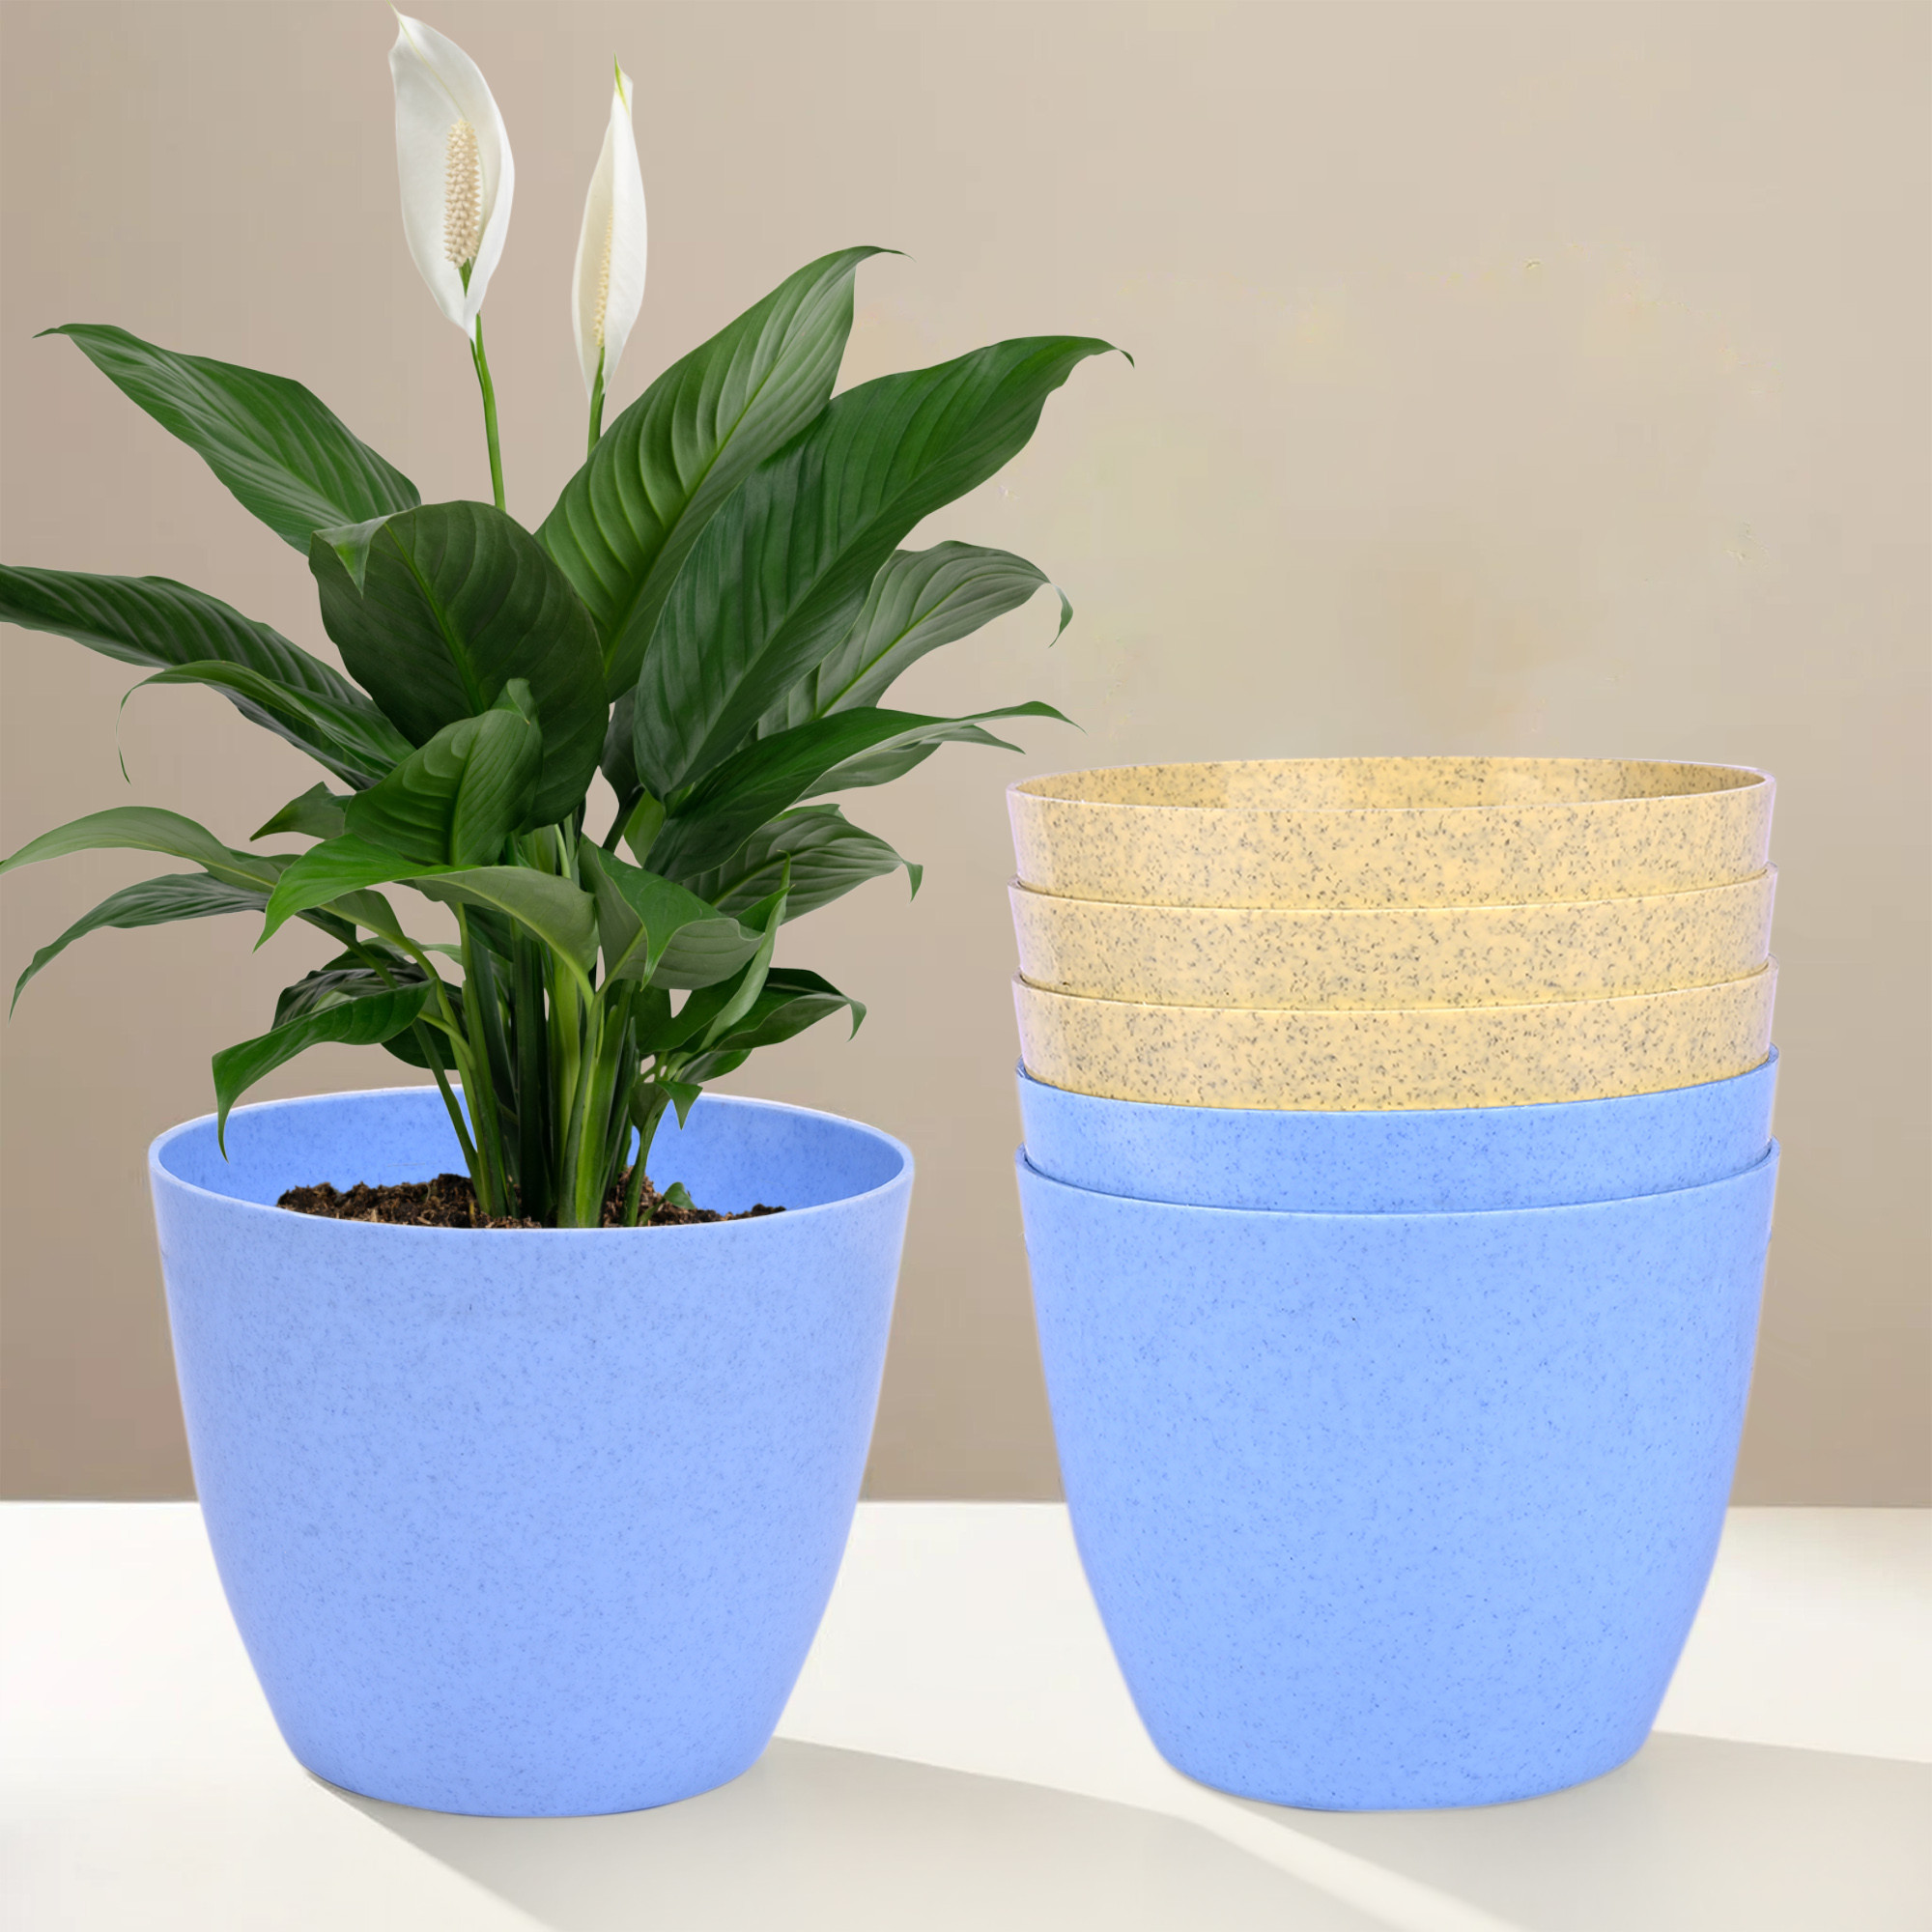 Kuber Industries Flower Pot | Flower Pot for Living Room-Office | Flower Planters for Home-office-Lawns & Garden Décor | Planters Pots for Balcony | Marble Cool | 5 Inch | Blue & Beige